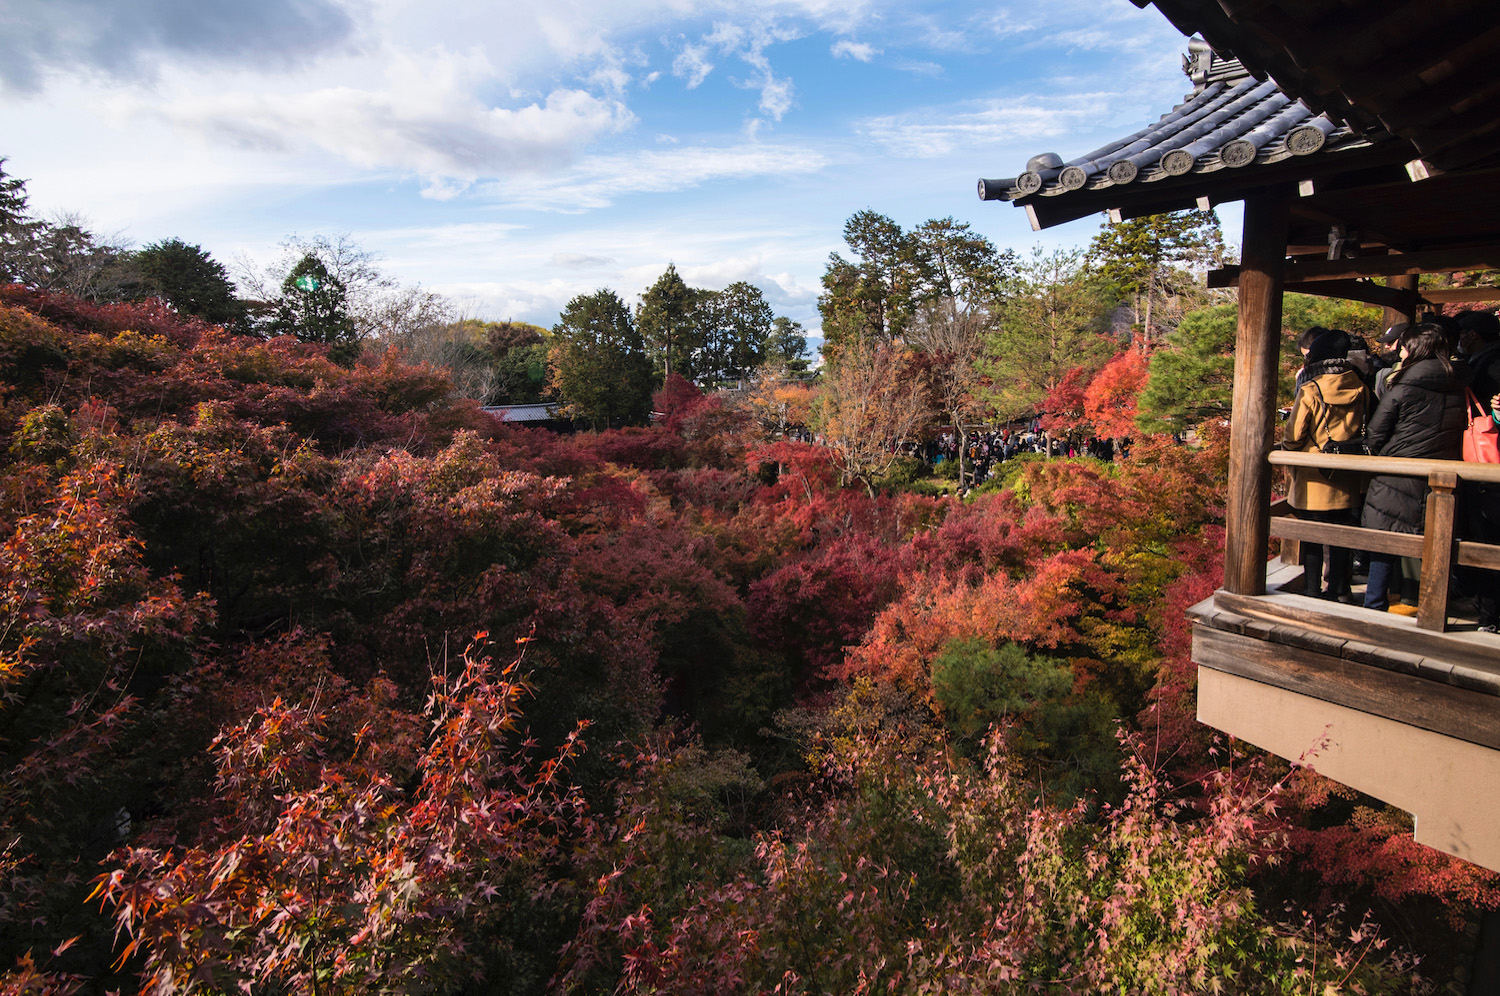 A Marvelous Menagerie Of Gardens In Kyoto